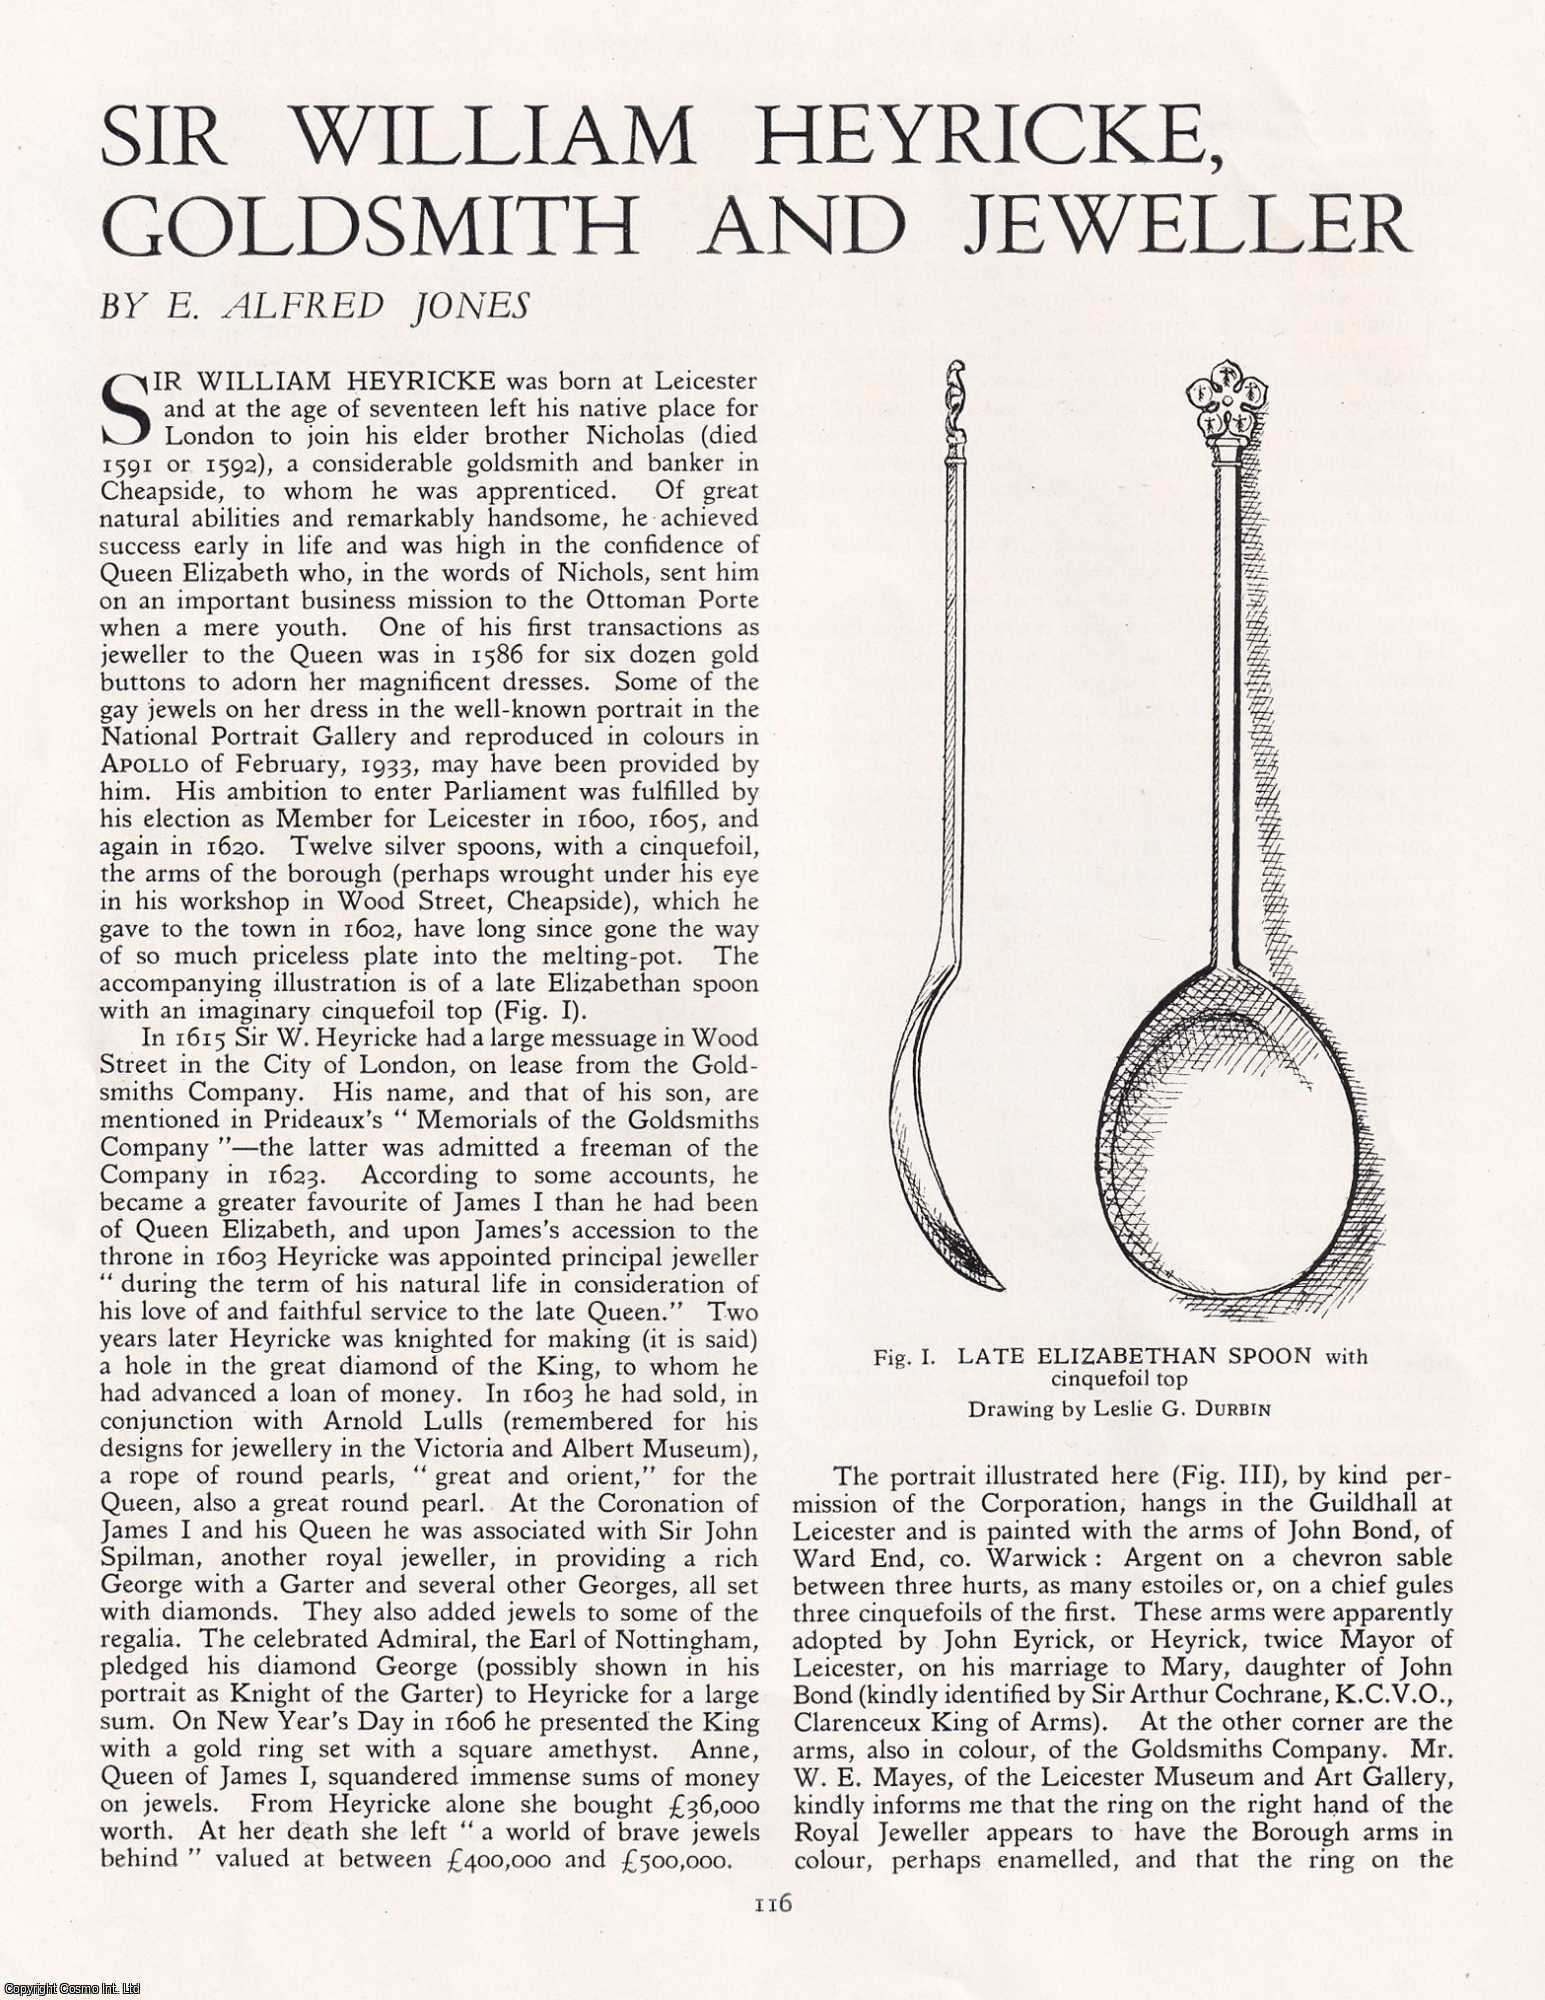 E. Alfred Jones - Sir William Heyricke, Goldsmith and Jeweller. An uncommon original article from Apollo, the Magazine of the Arts, 1942.